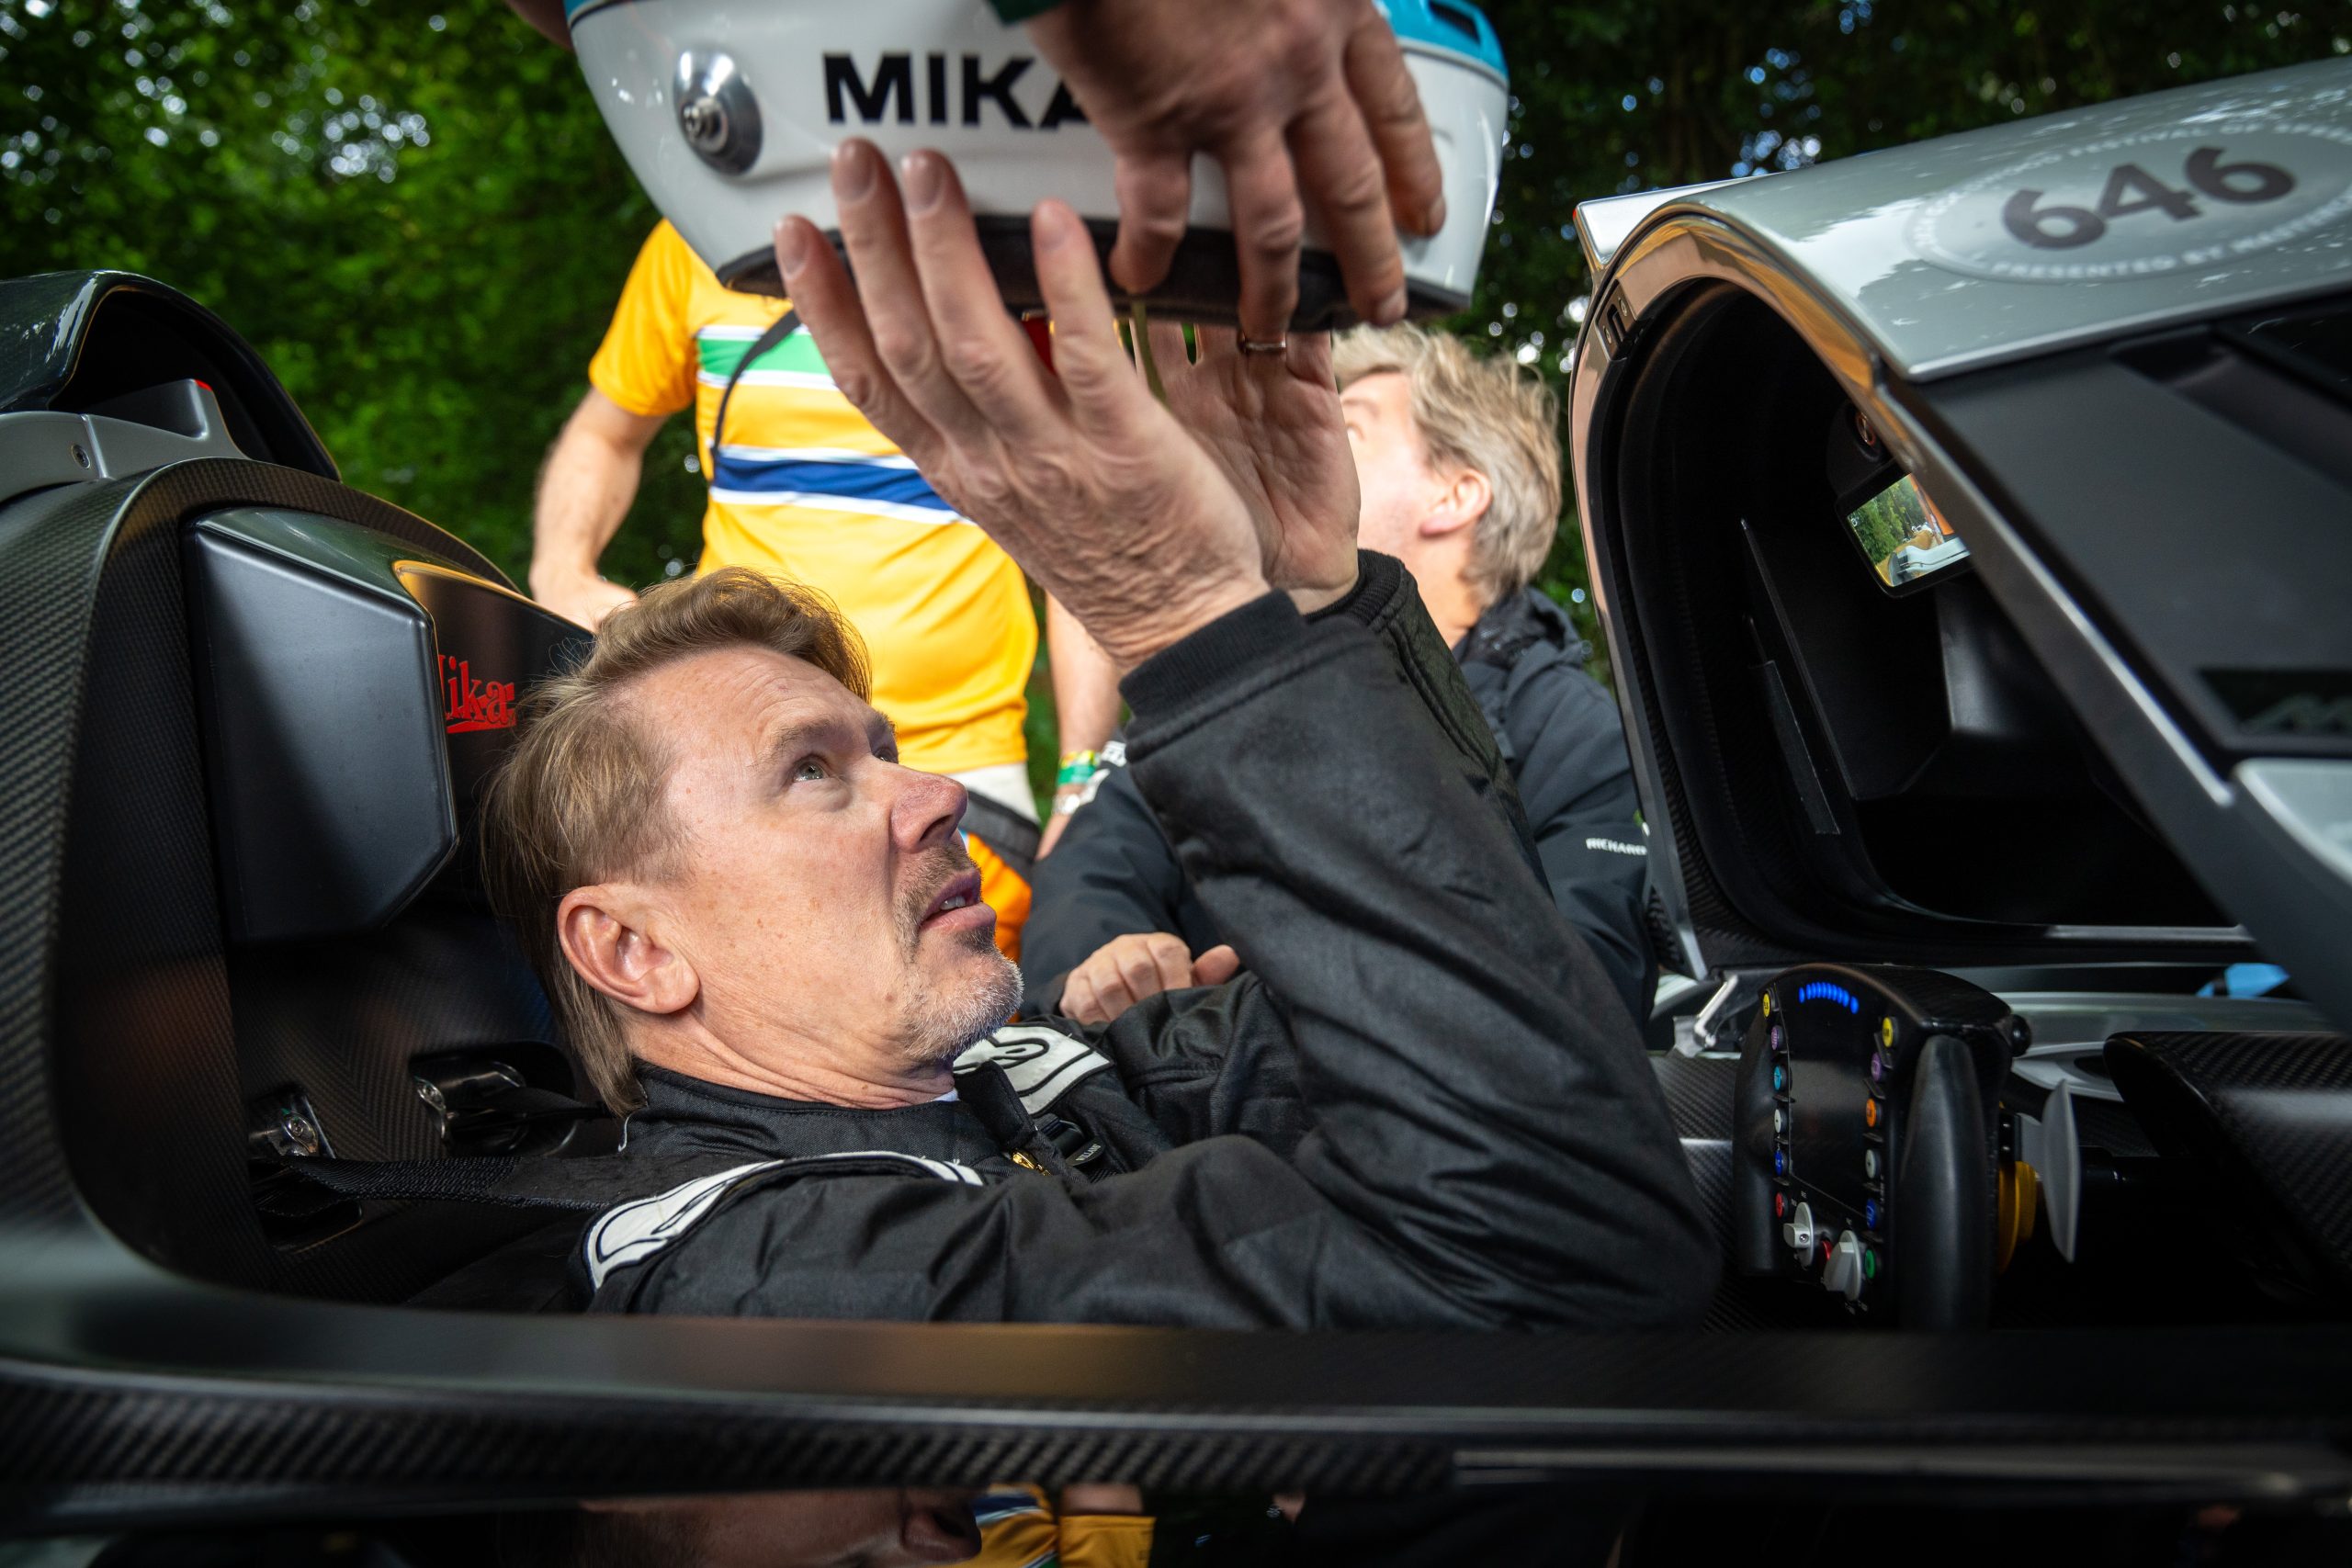 Two-time Formula 1 World Champion Mika Häkkinen drives the McLaren Solus GT at the Goodwood Festival of Speed [Photo Gallery]